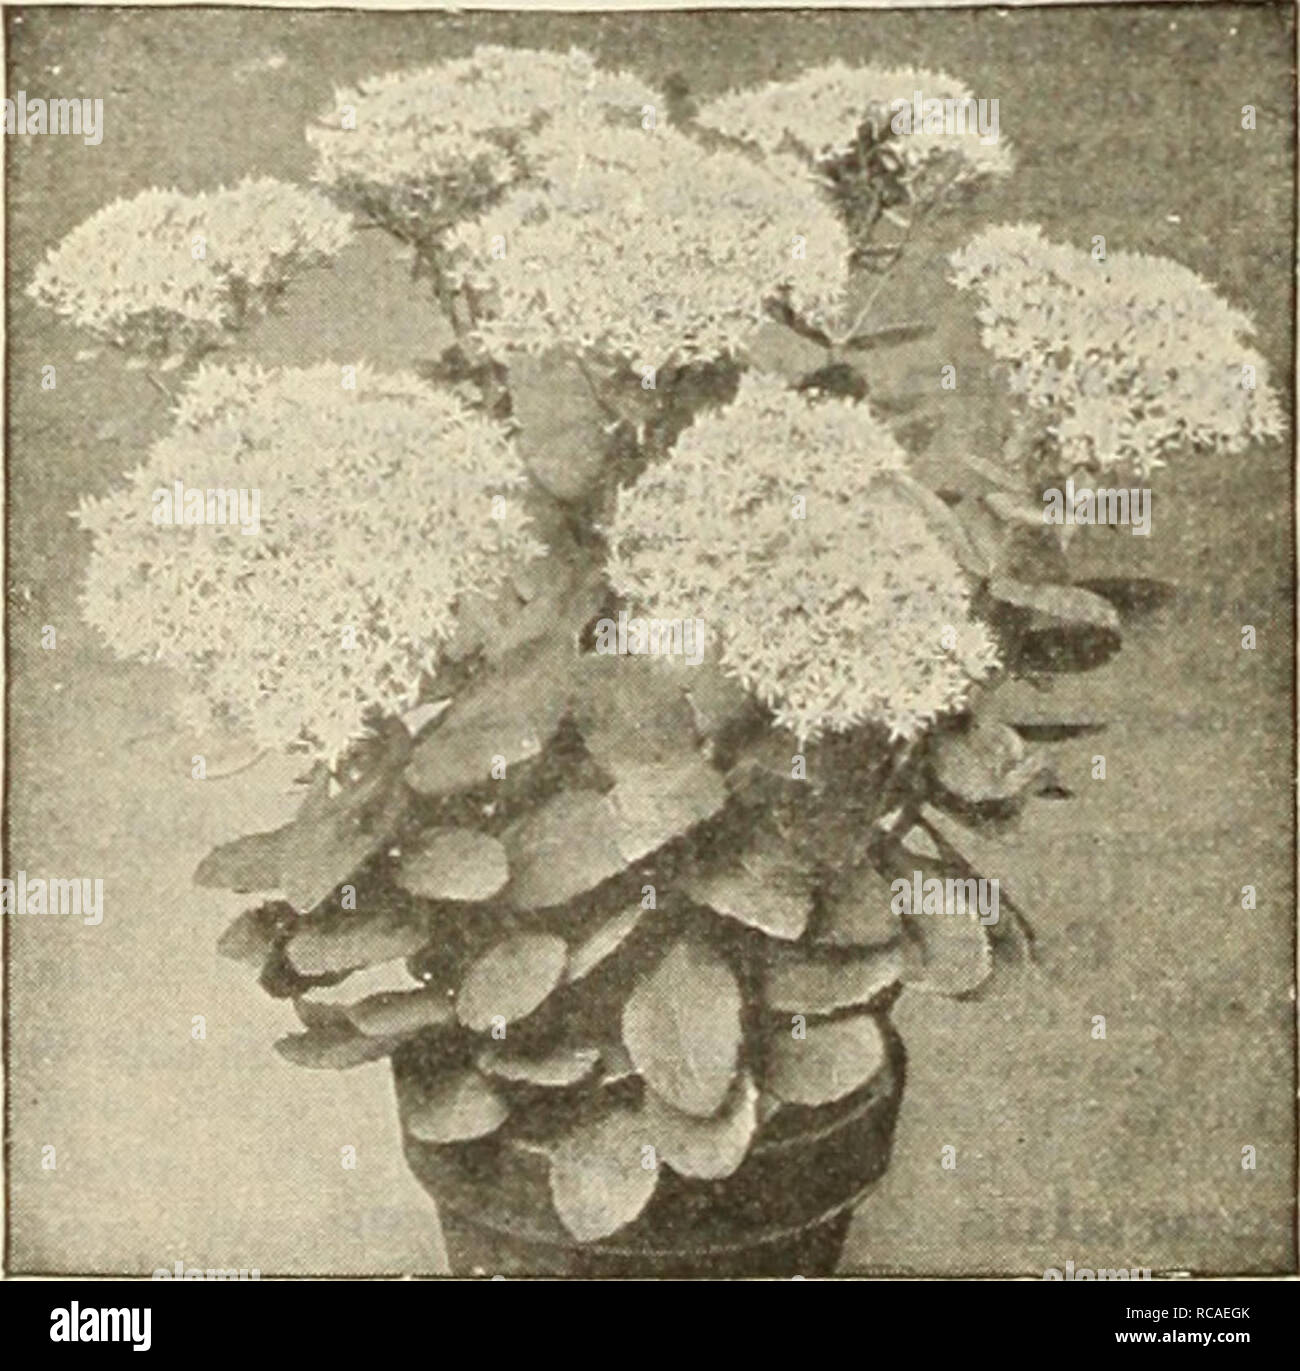 . Dreer's autumn catalogue 1925. Bulbs (Plants) Catalogs; Flowers Seeds Catalogs; Gardening Equipment and supplies Catalogs; Nurseries (Horticulture) Catalogs; Vegetables Seeds Catalogs. Rudbeckia Purpurea (Giant I'urplc Cone Flower). Sedum Spectabile Silene (CatchHy) Alpestris. A good rock plant grows about 4 inches high with glistening white flowers in July and August. Sbafta {Autumn Calchfly). A charming rock plant, growing 4 to 6 inches high, with masses of bright pink flowers from July to October 25 cts. each; $2.50 per doz.; $15.00 per 100. Sedum (StoneCrop) Suitable for the rockery, car Stock Photo